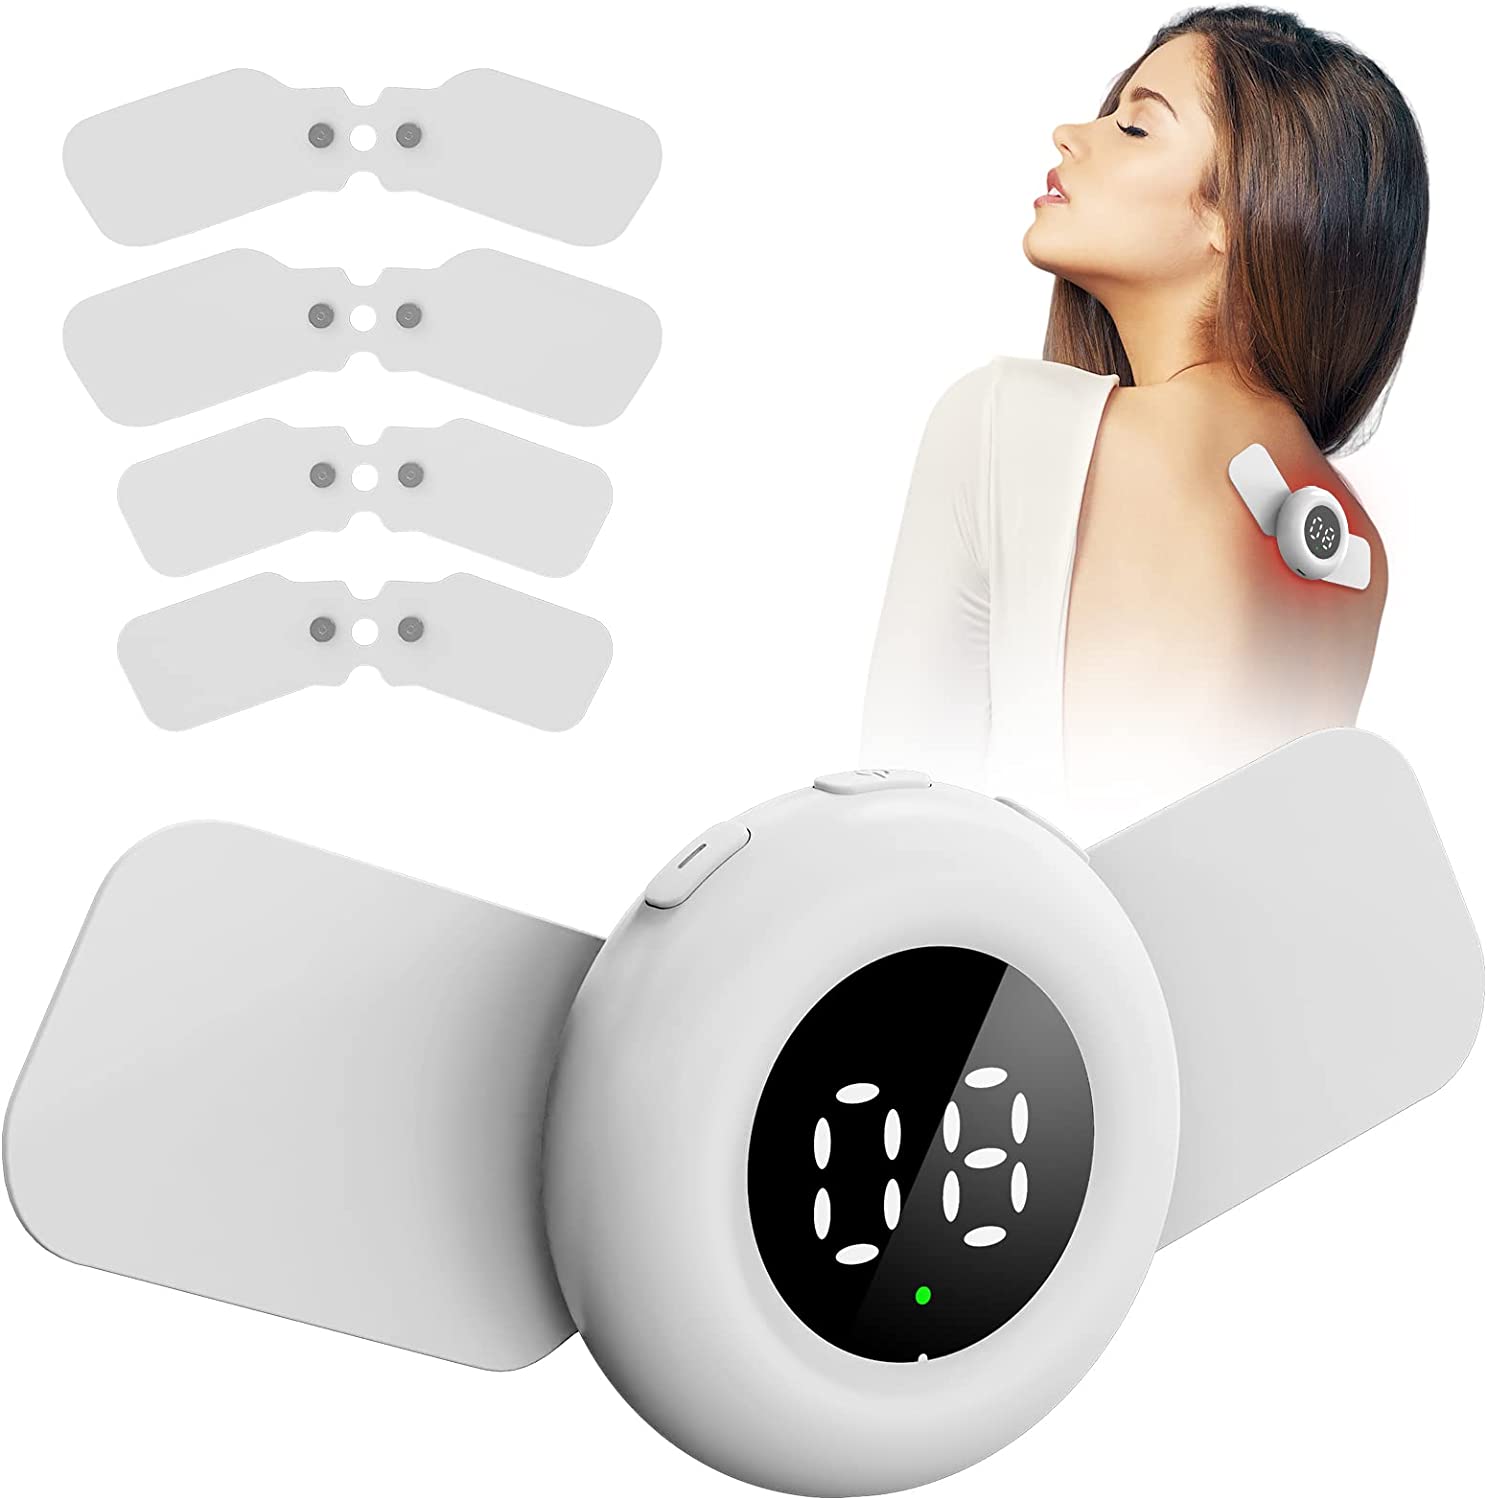 KTS Wireless Back Pain Relief Massager with Laser Therapy